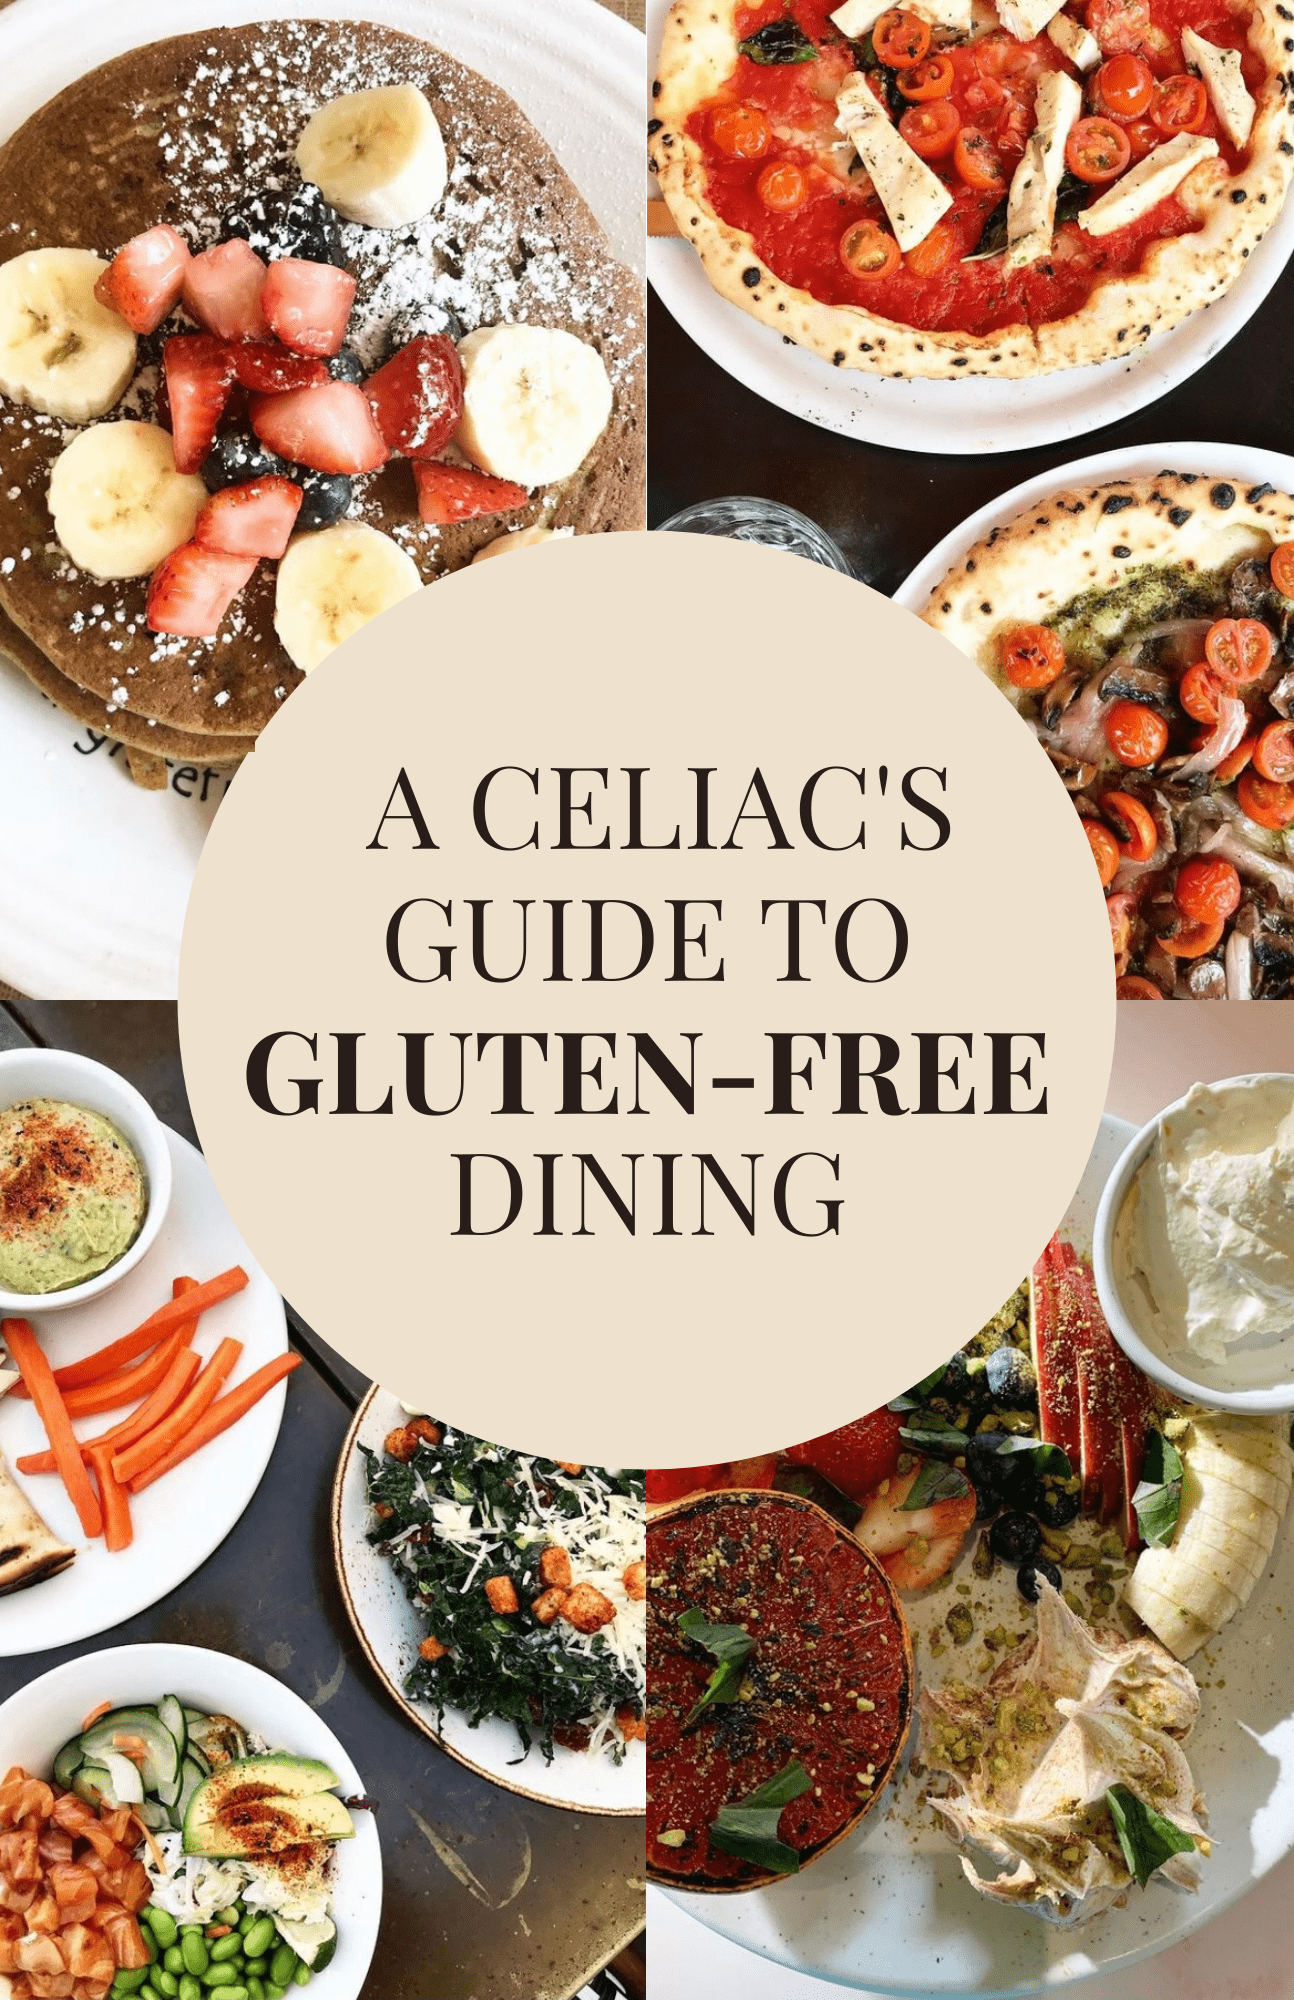 A Celiac’s Guide to Gluten-Free Dining